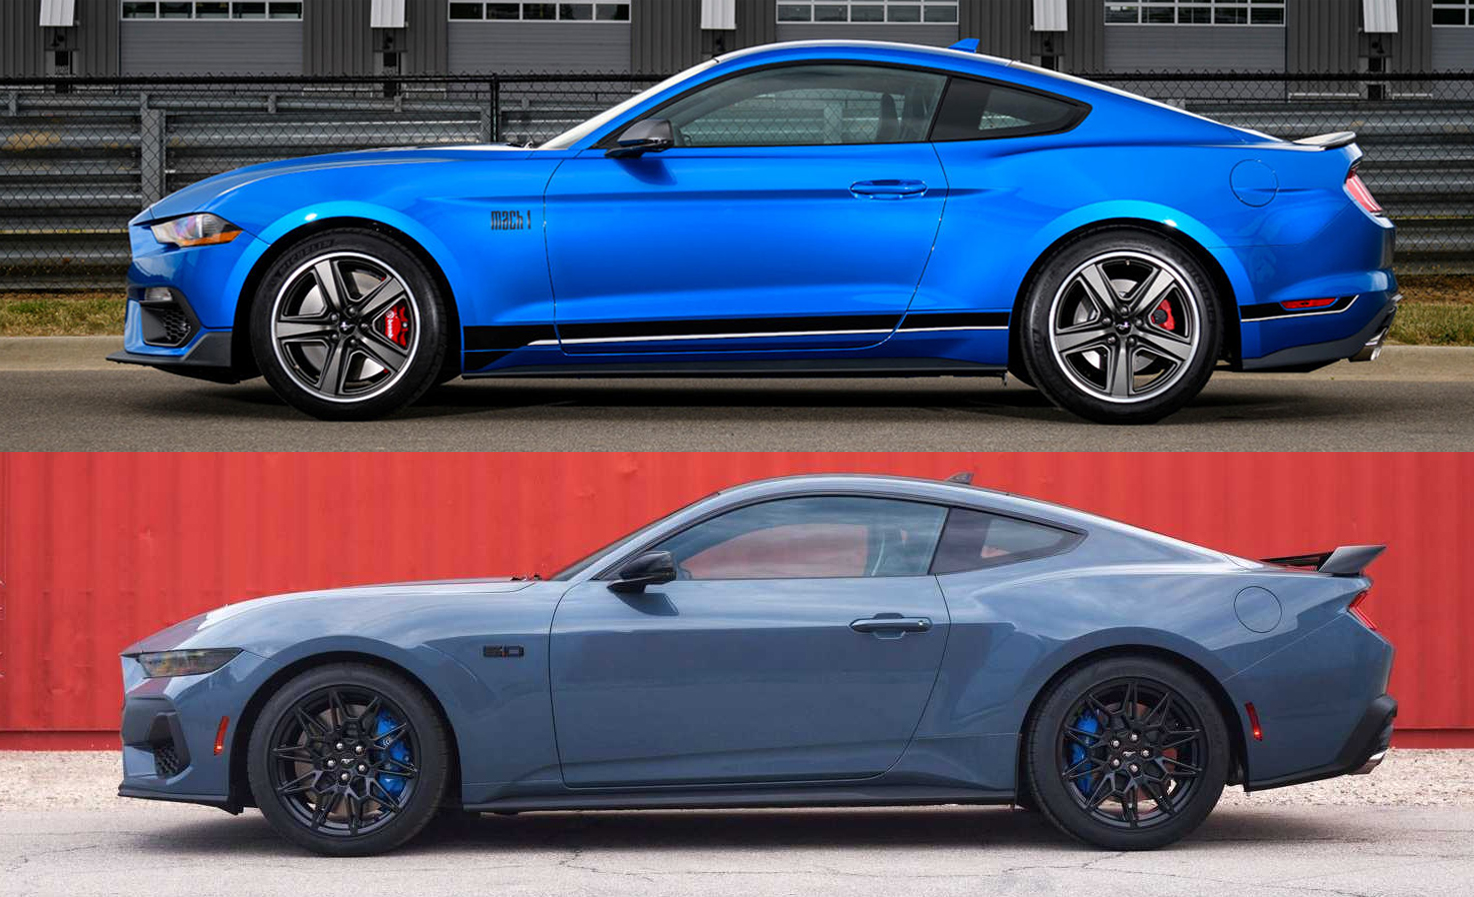 S650 Mustang S650 Mustang Fanboi Thread compare